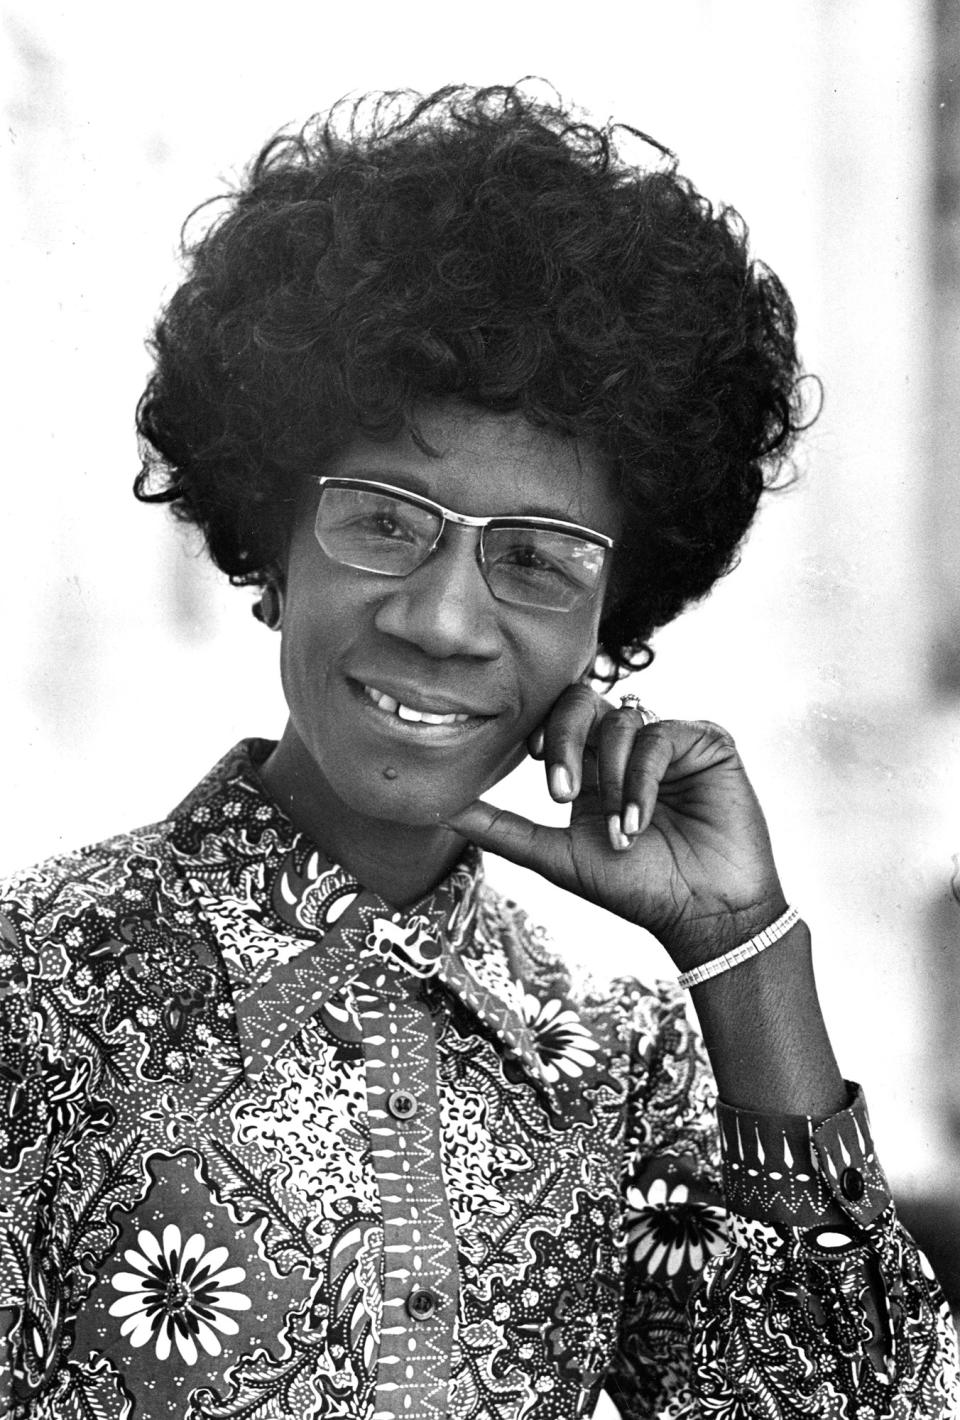 FILE- In this 1971 file photo, Congresswoman Shirley Chisholm, D-N.Y., is shown. The pioneering lawmaker will be honored with a statue in the New York City borough she served as the first black woman elected to the U.S. Congress. New York City officials announced Friday, Nov. 30, 2018, that a monument to Chisholm will be installed at the entrance to Brooklyn's Prospect Park. (AP Photo)